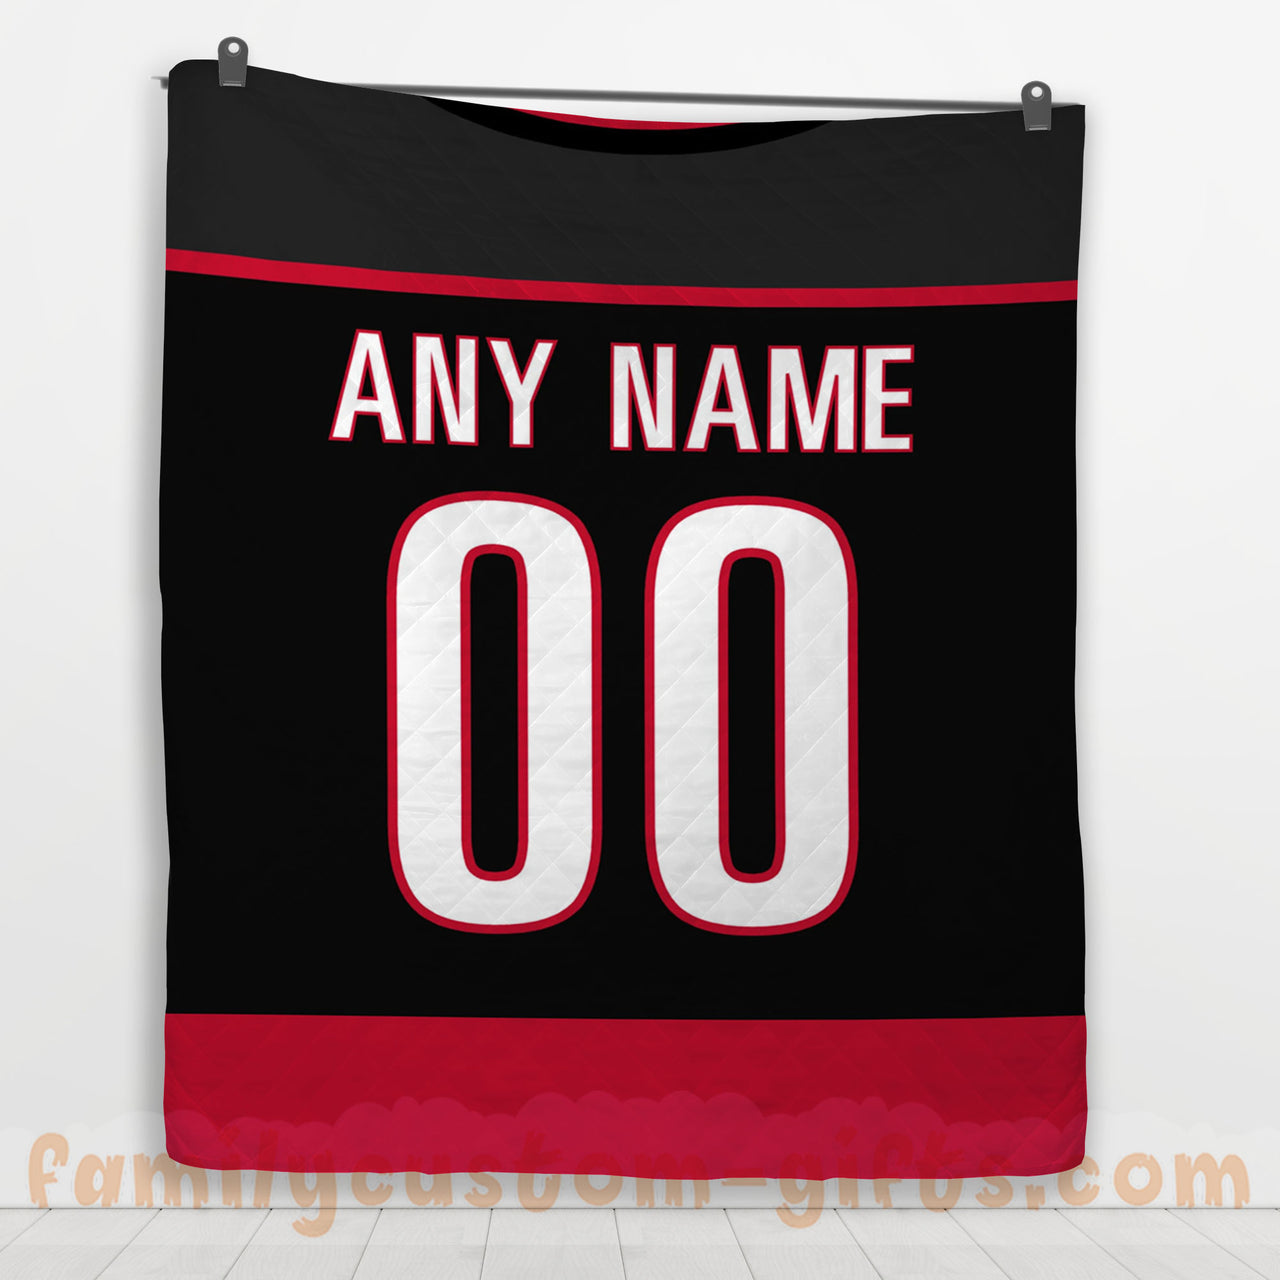 Custom Premium Quilt Blanket Carolina Jersey Ice Hockey Personalized Quilt Gifts for Her & Him